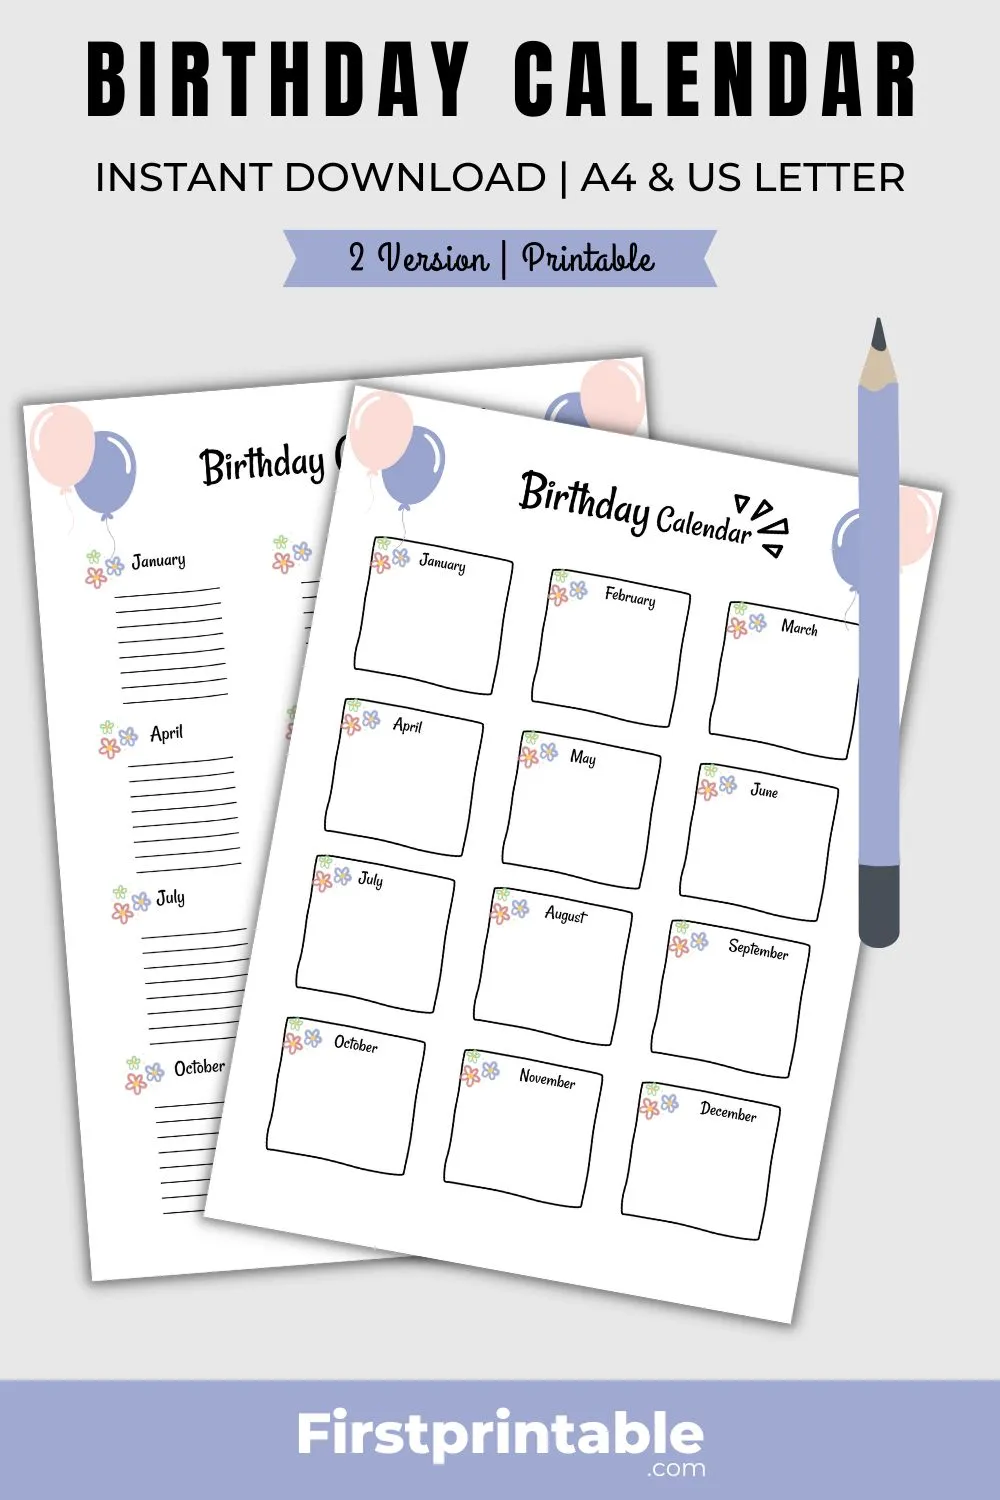 A blank birthday calendar template with colorful balloons and confetti decorations, ready to be filled with birthdays and printed out for personal use.